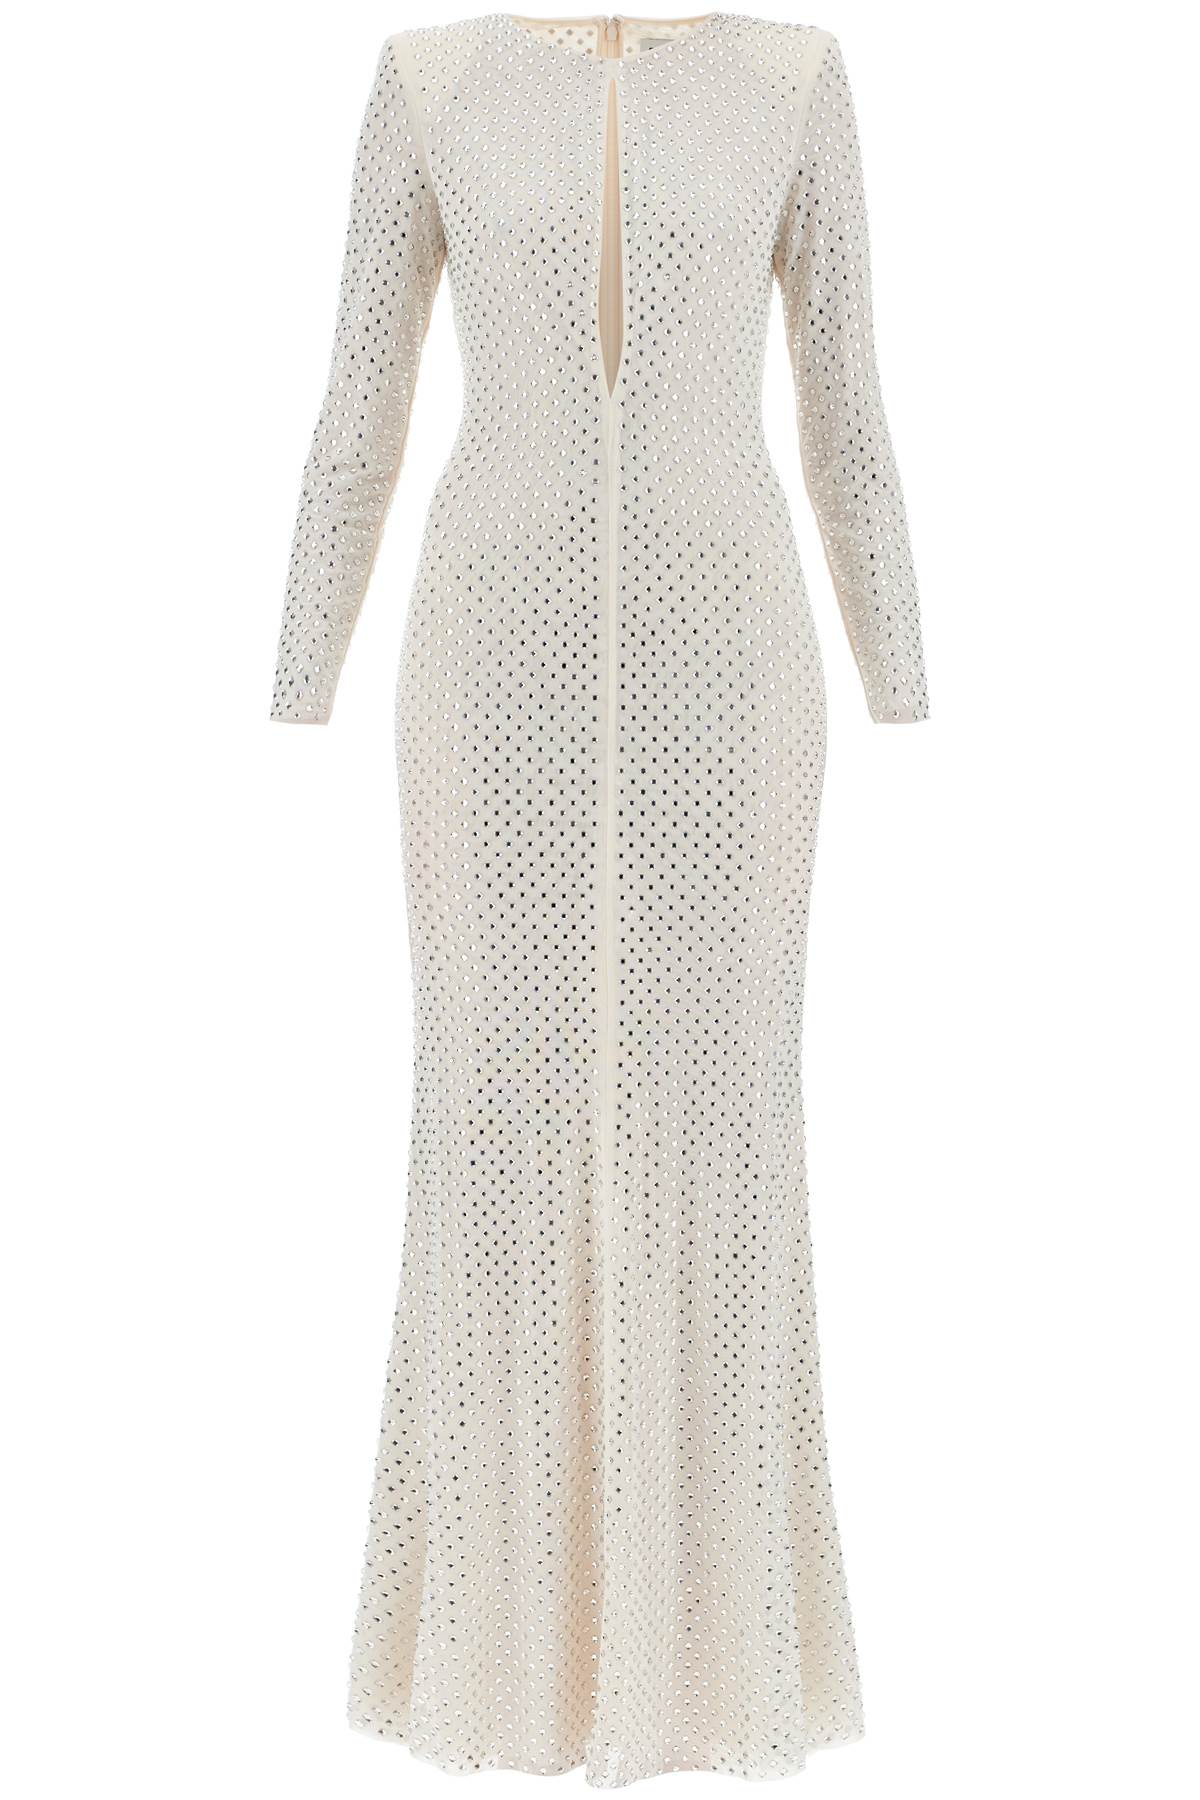 SELF-PORTRAIT LONG MESH DRESS WITH CRYSTALS